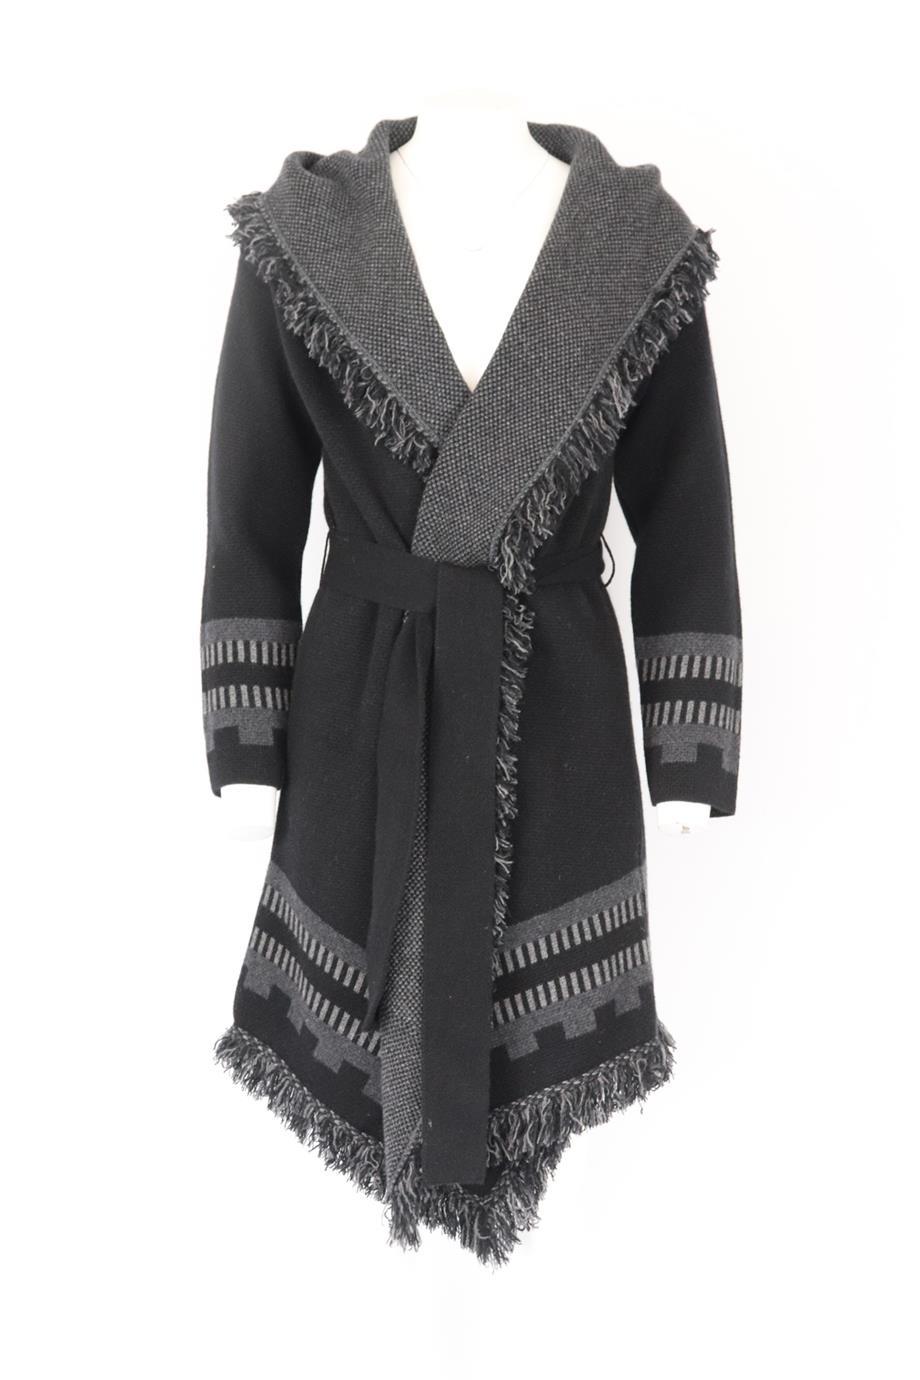 Fleetwood LA fringed jacquard knit cashmere cardigan. Black and grey. Long sleeve, v-neck. Belt fastening at front. 100% Cashmere. Size: XSmall-Small (UK 6-8, US 2-4, FR 34-36, IT 38-40). Bust: 39 in. Waist: 38 in. Hips: 41 in. Length: 35 in. Very